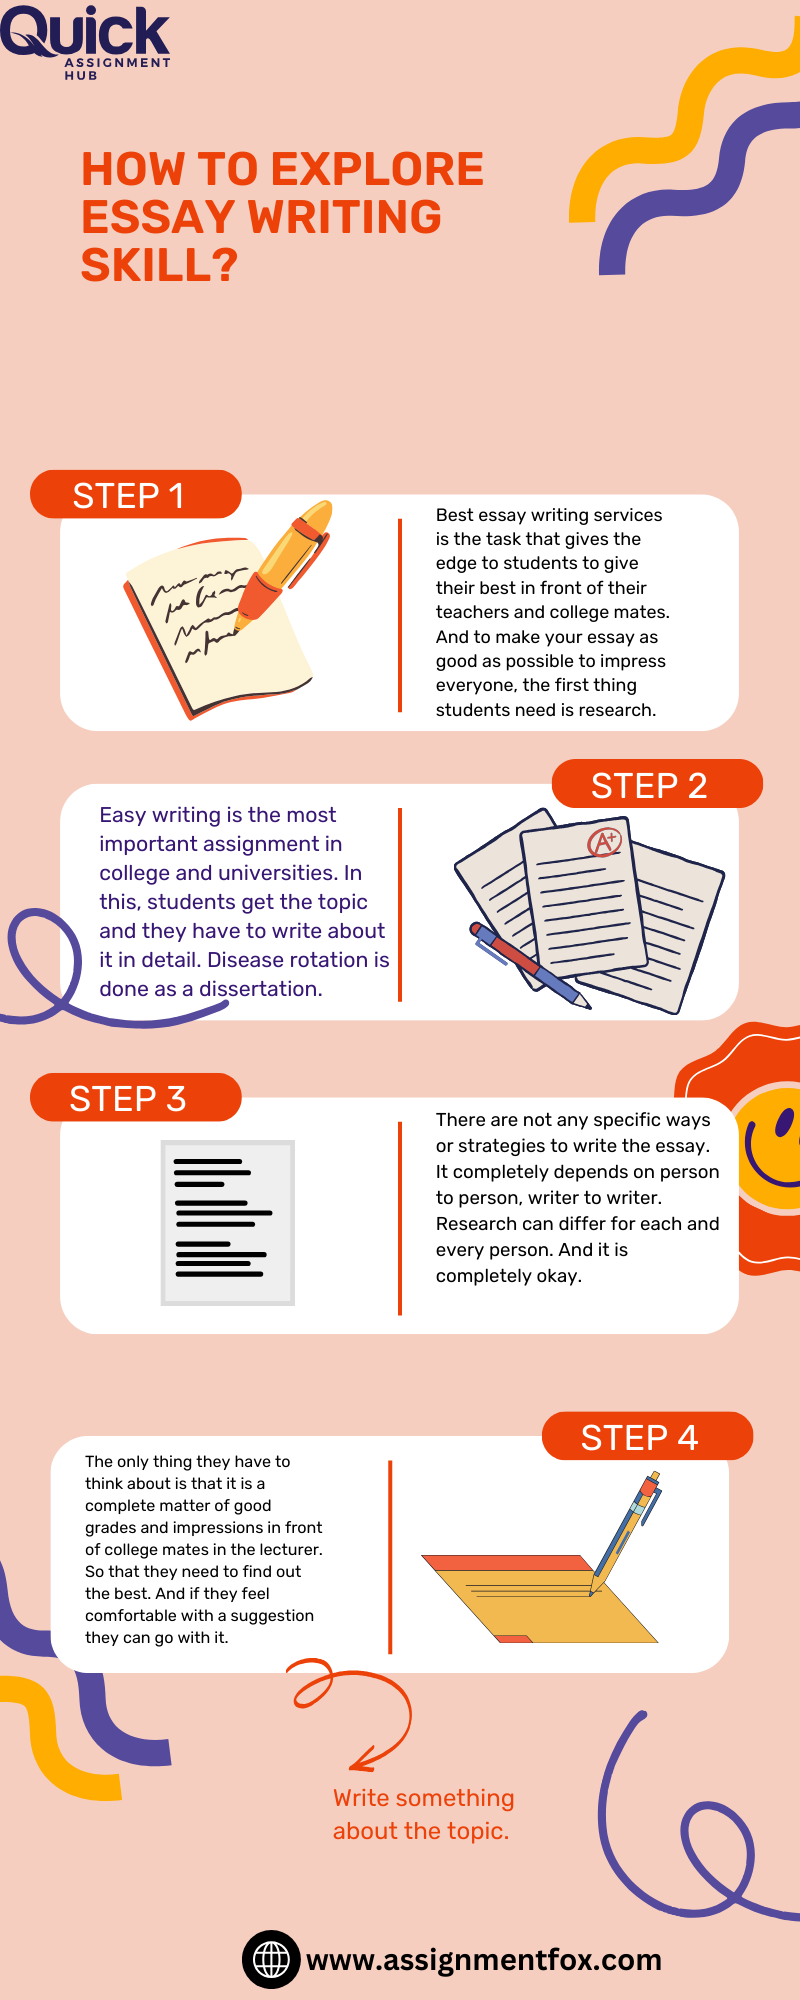 How to Write an Essay To Impress Everyone? Which Kind Of Steps Should We Follow?